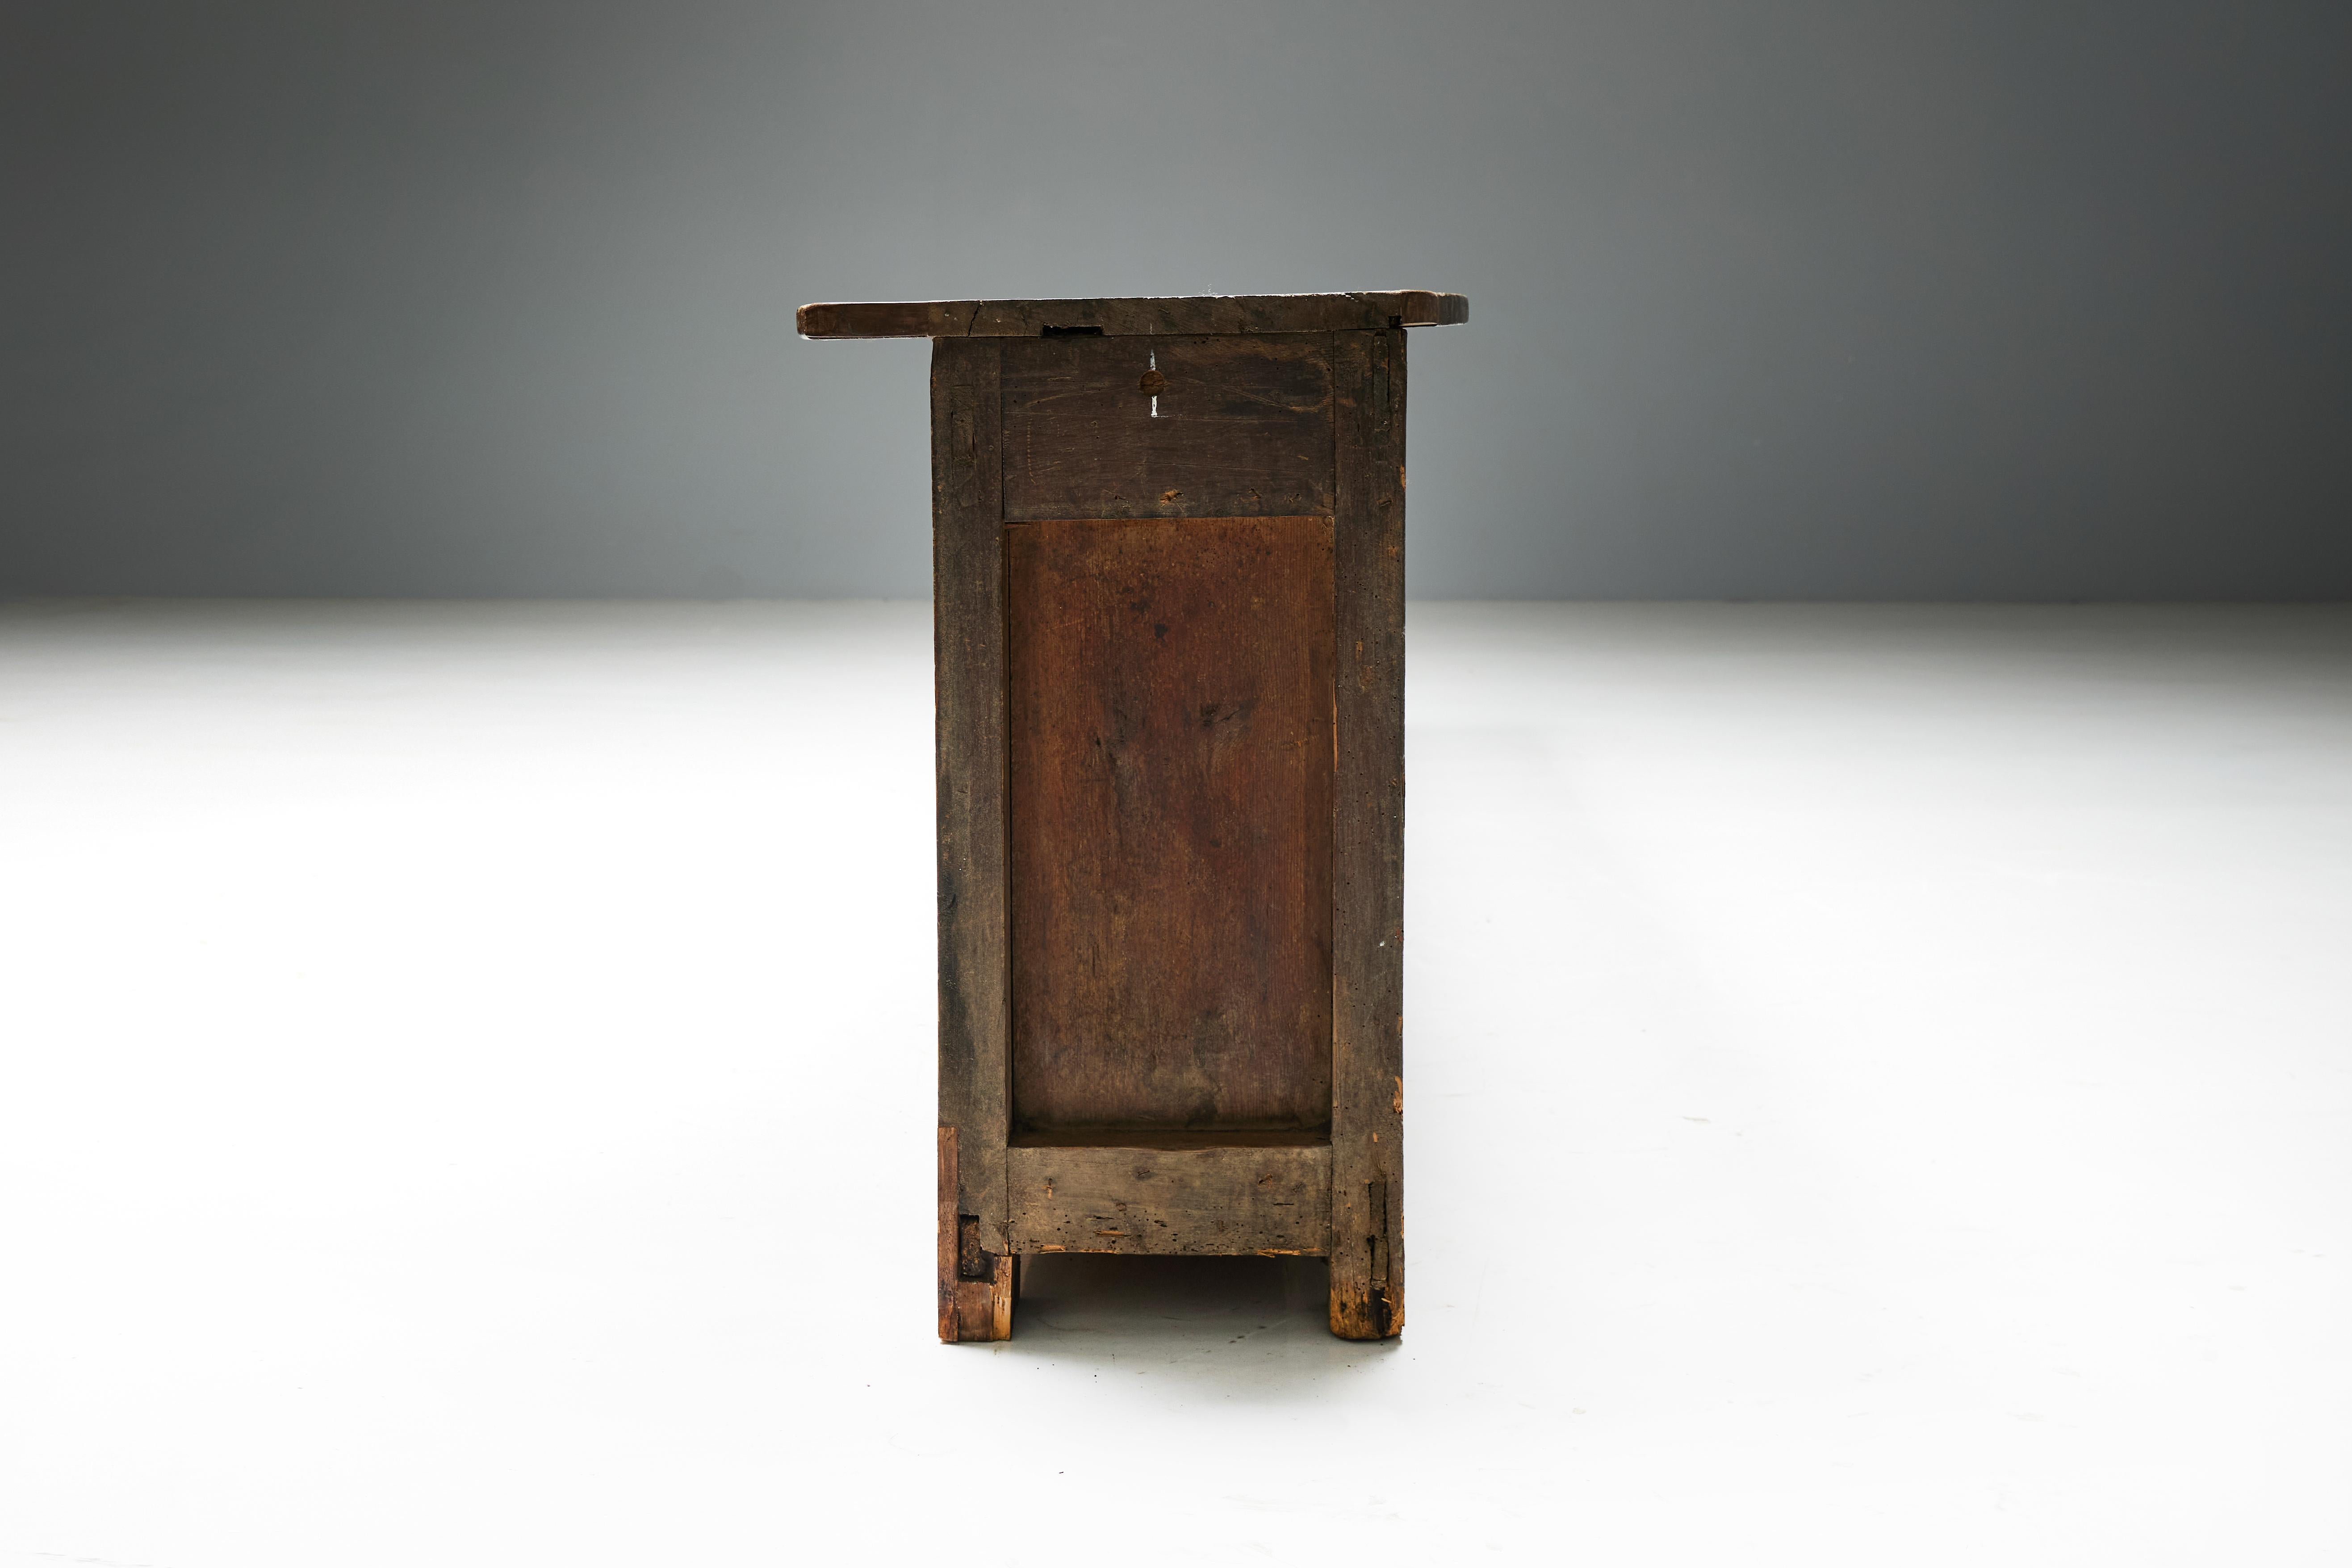 Rustic Art Populaire Freestanding Bar Counter, France, 19th Century 1